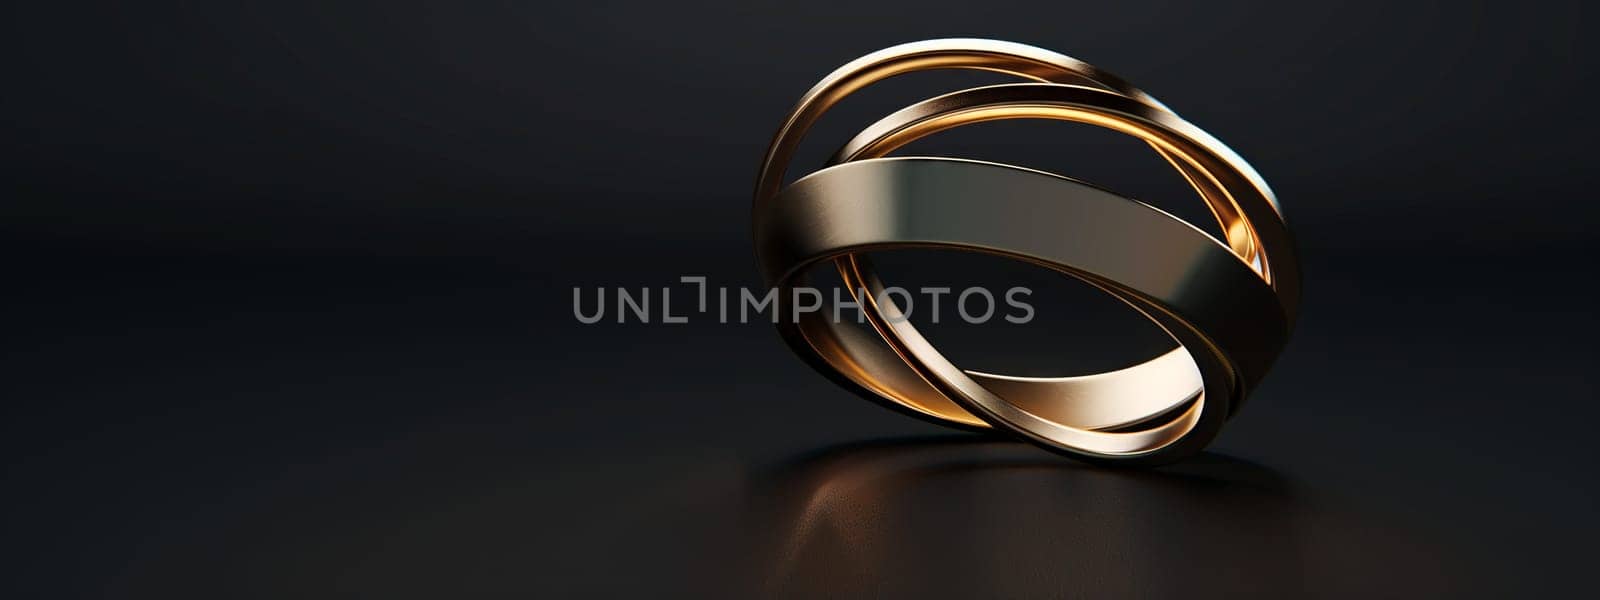 Close up of a wedding ring on a sleek black surface by richwolf